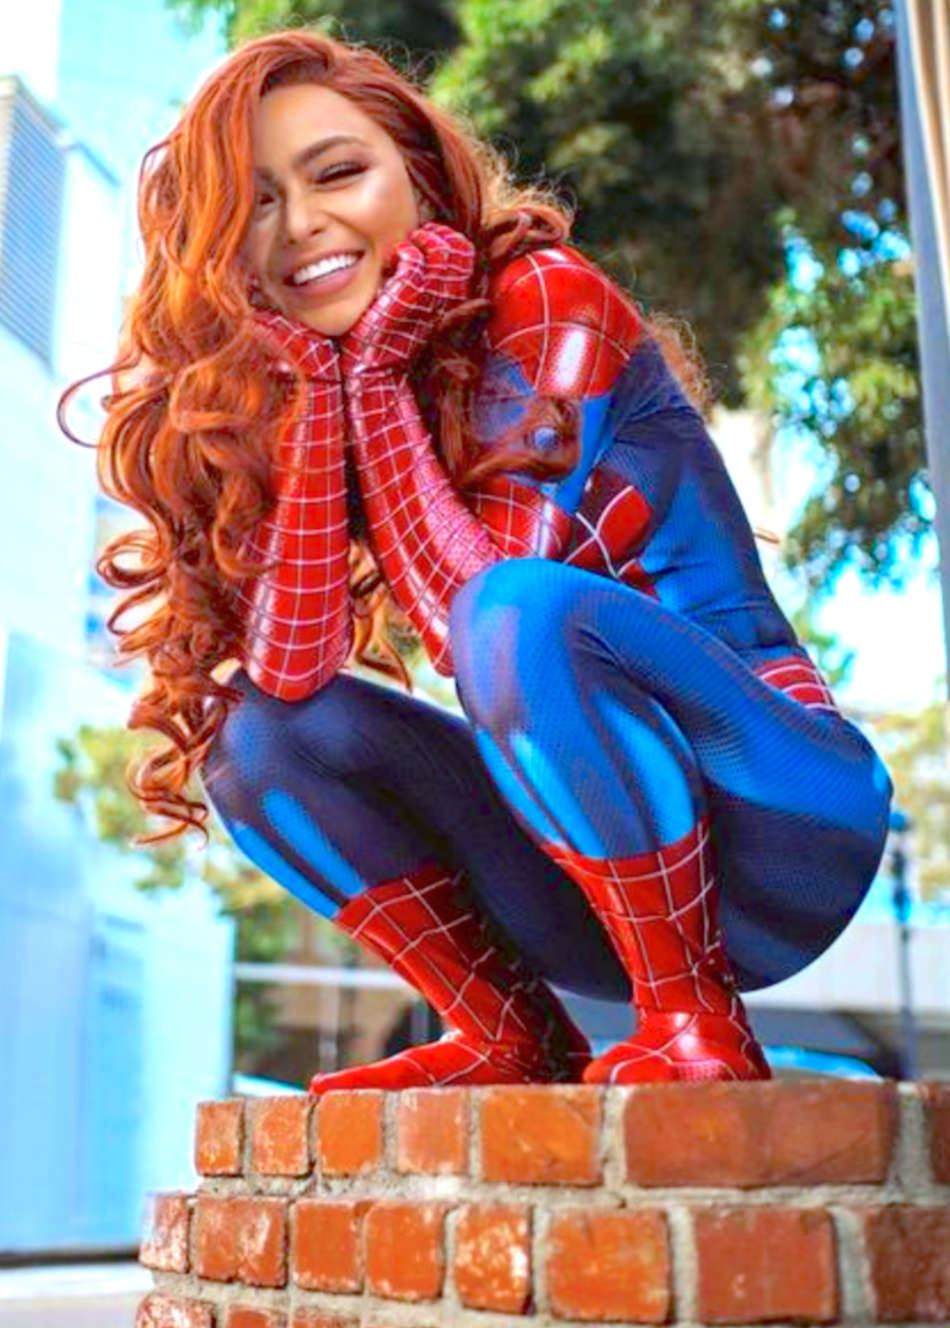 Sexy Red Hot Cosplay Girls Spiderman Women Best Photo Compilation 2021 (89 HQ Photos) 510